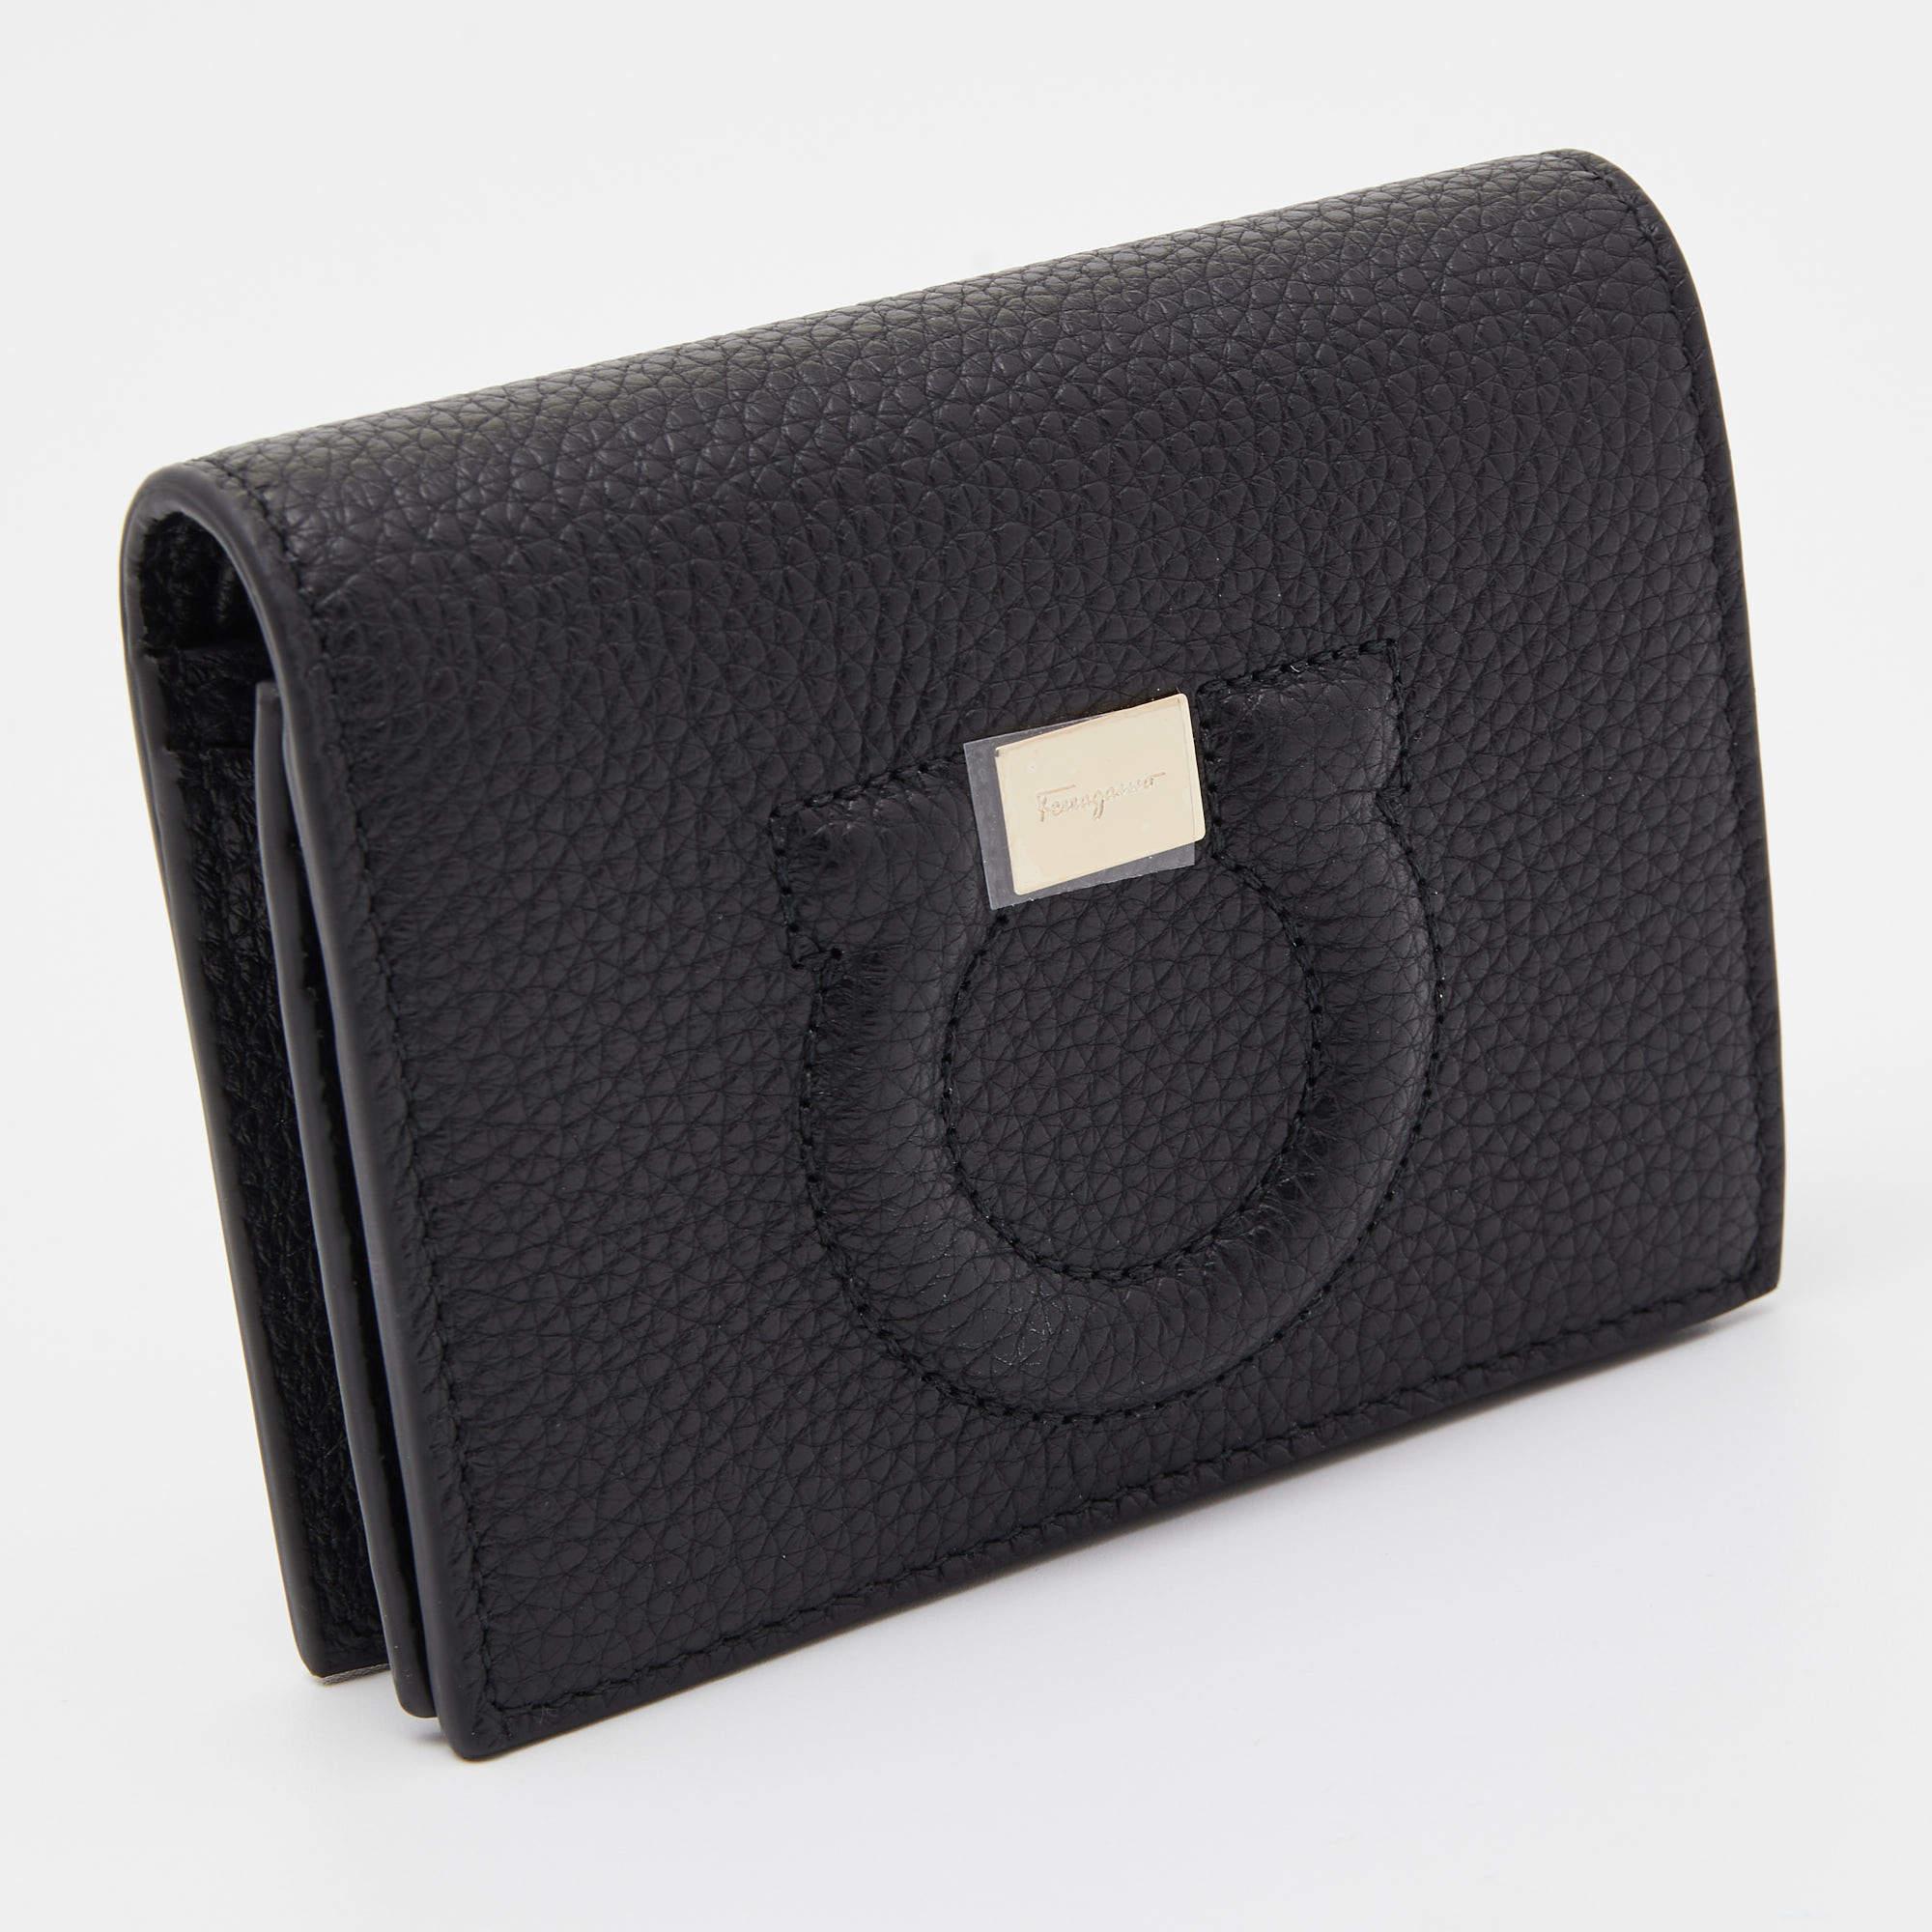 This stylish and functional Salvatore Ferragamo cardholder is a must-have in your collection. It is equipped with multiple, well-lined slots to hold your cards.

